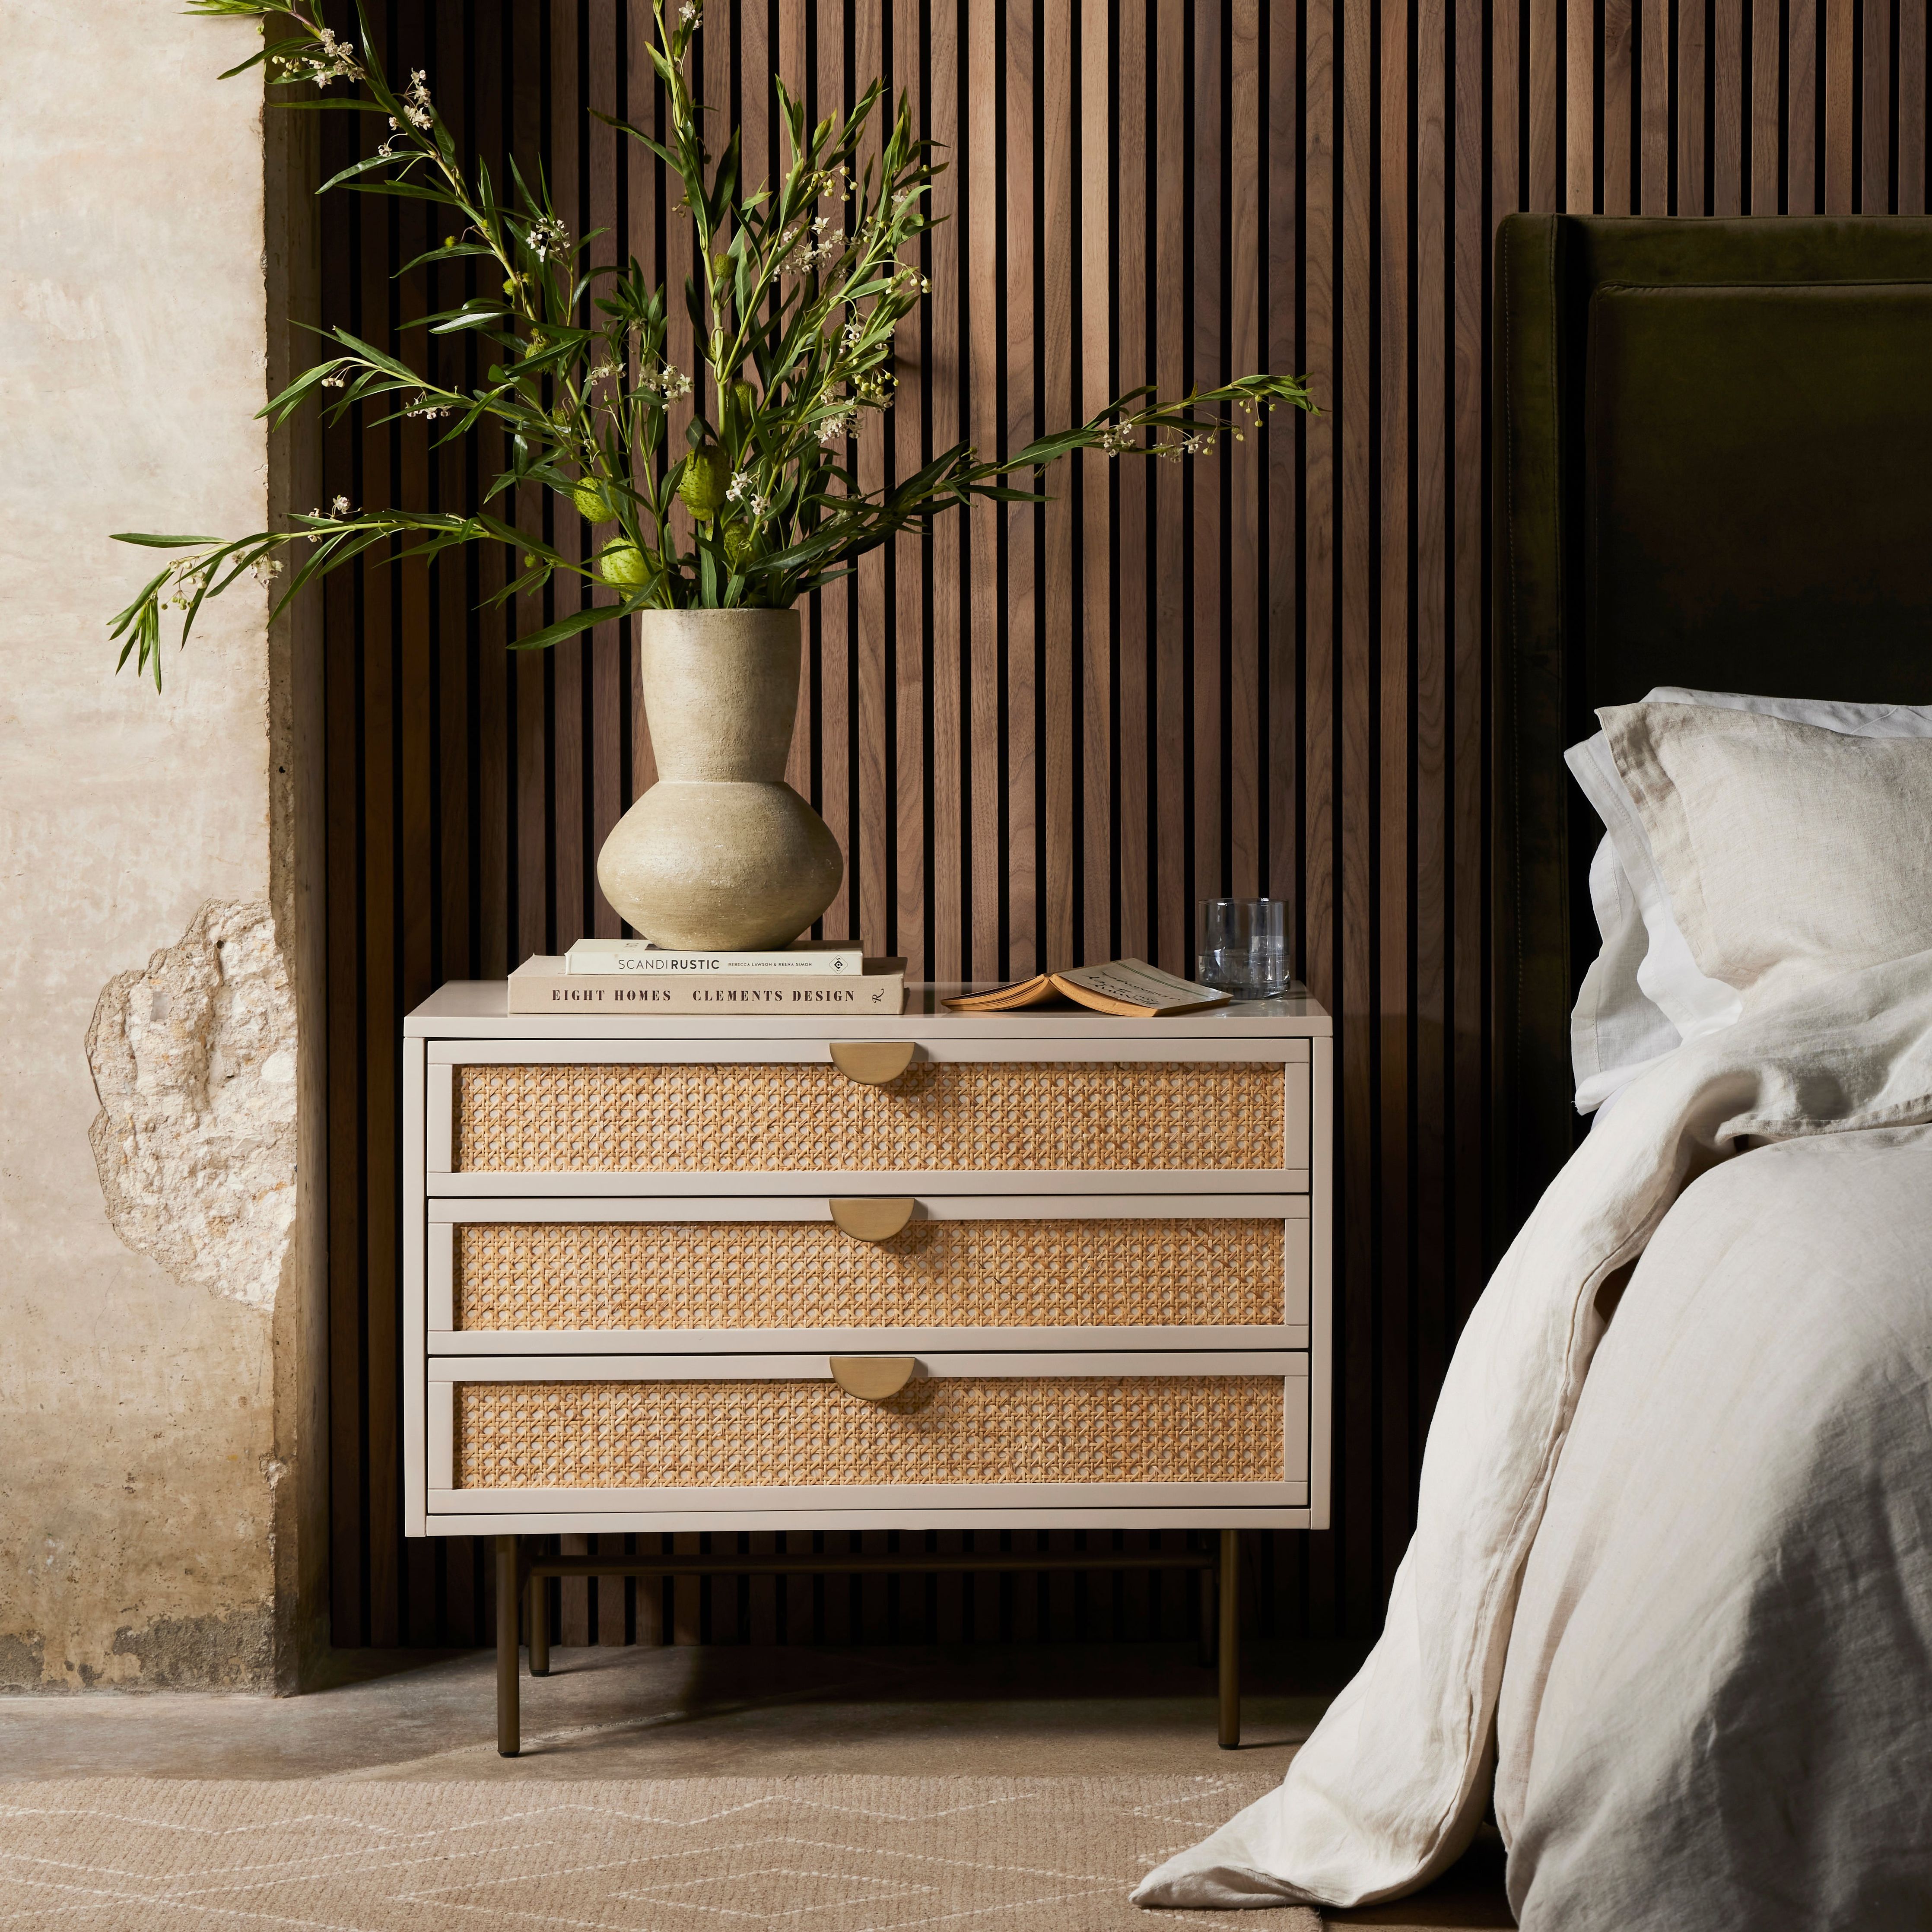 Bring a light, textural look to bedside storage. A lacquered three-drawer nightstand features woven cane panels and half-moon hardware finished in an aged brass. Amethyst Home provides interior design, new construction, custom furniture, and area rugs in the Austin metro area.